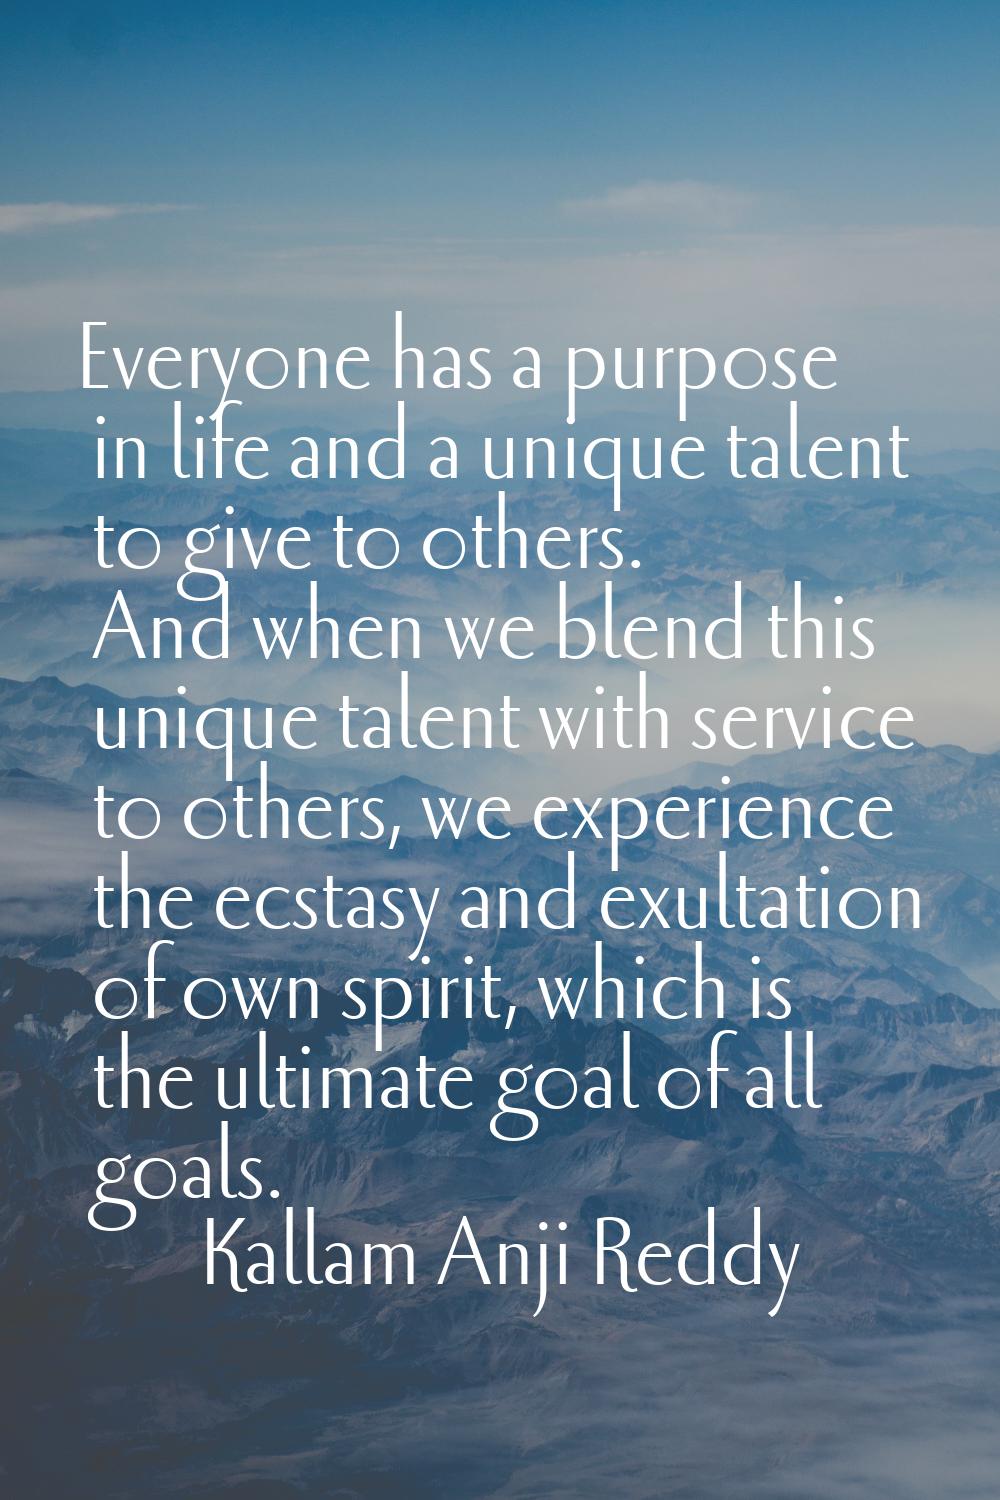 Everyone has a purpose in life and a unique talent to give to others. And when we blend this unique